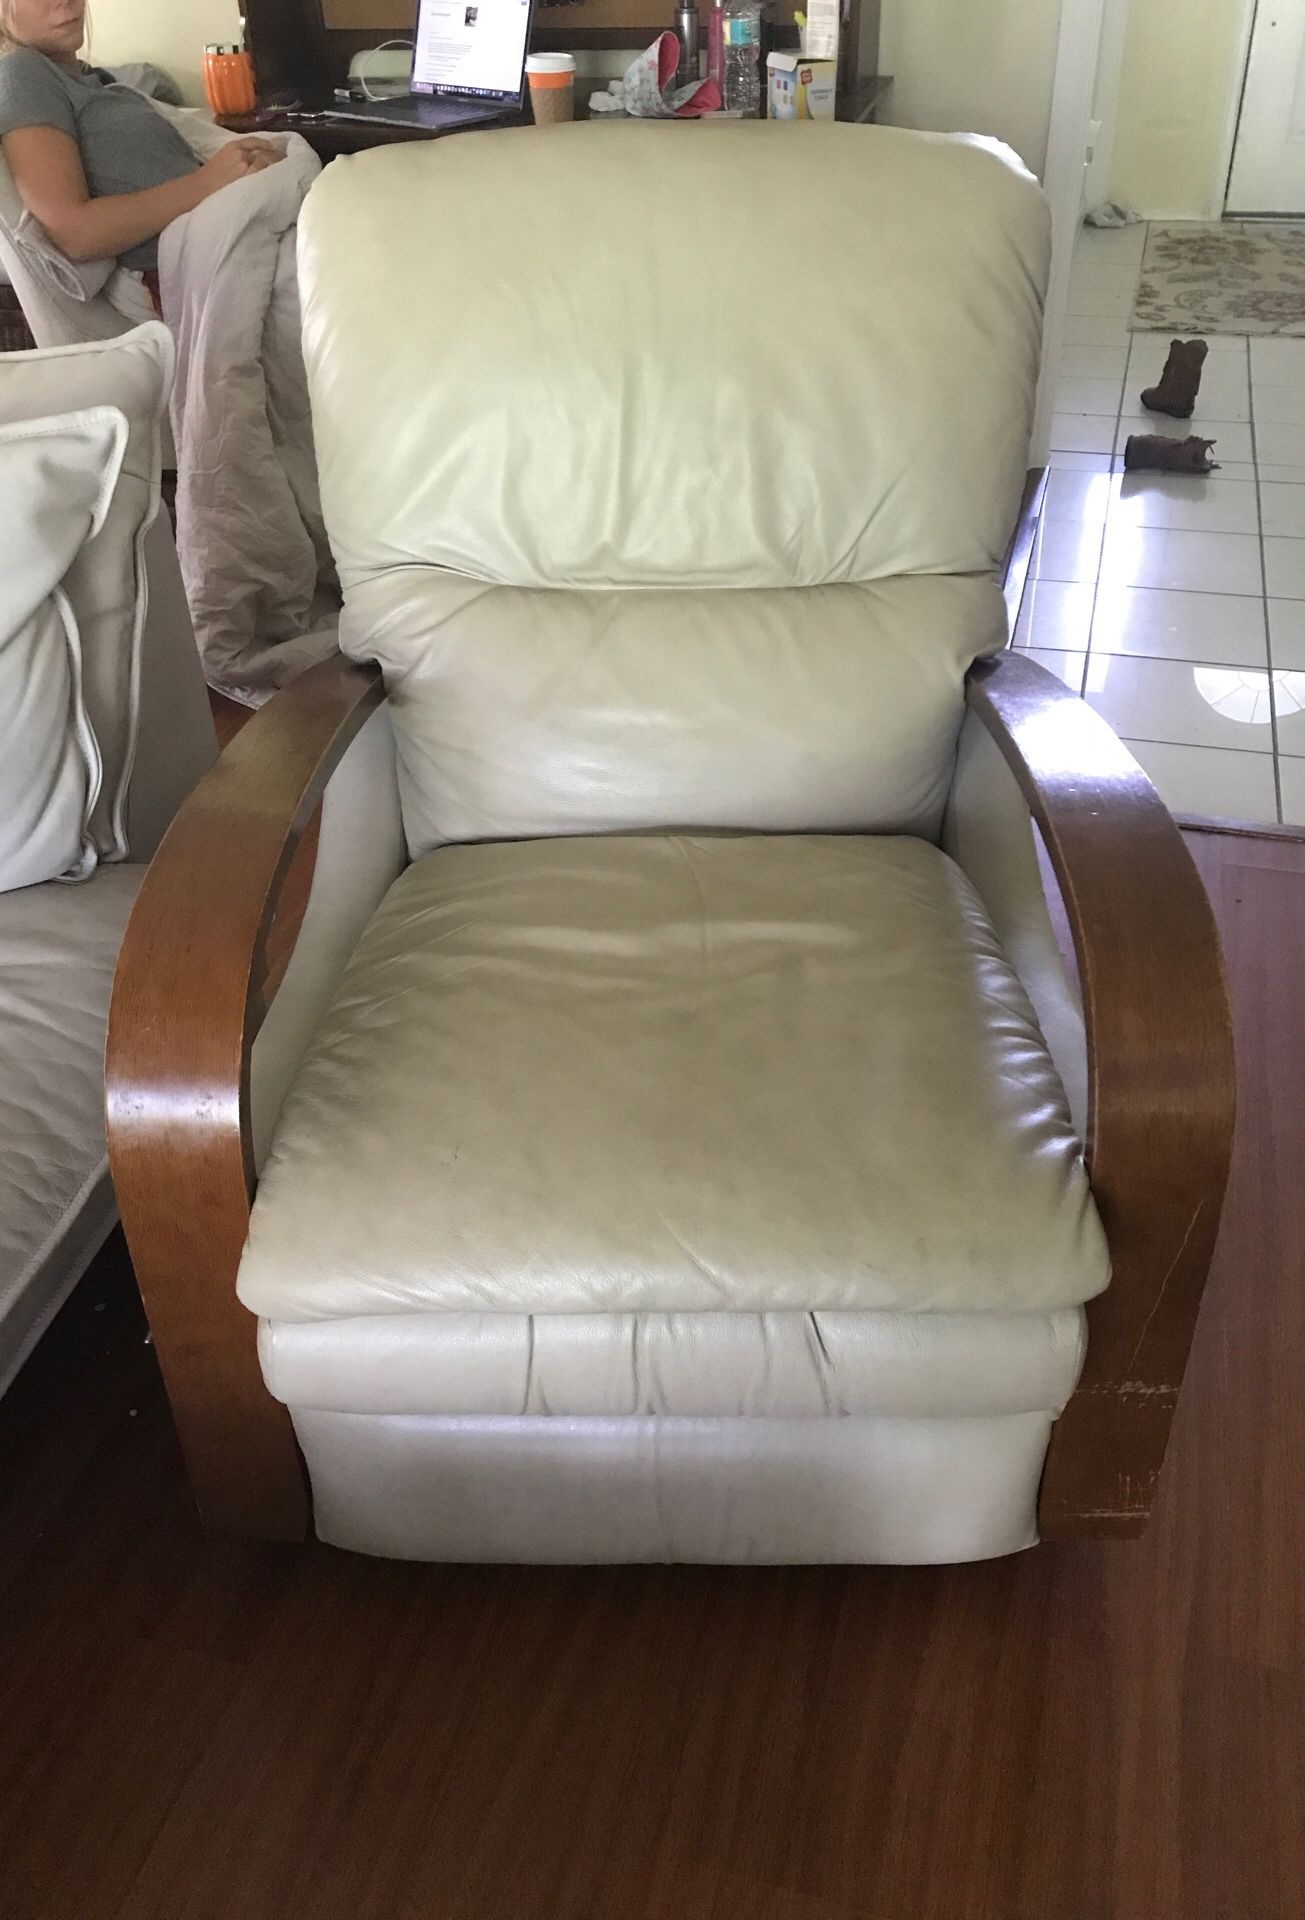 Chair lazy boy 150 or best offer